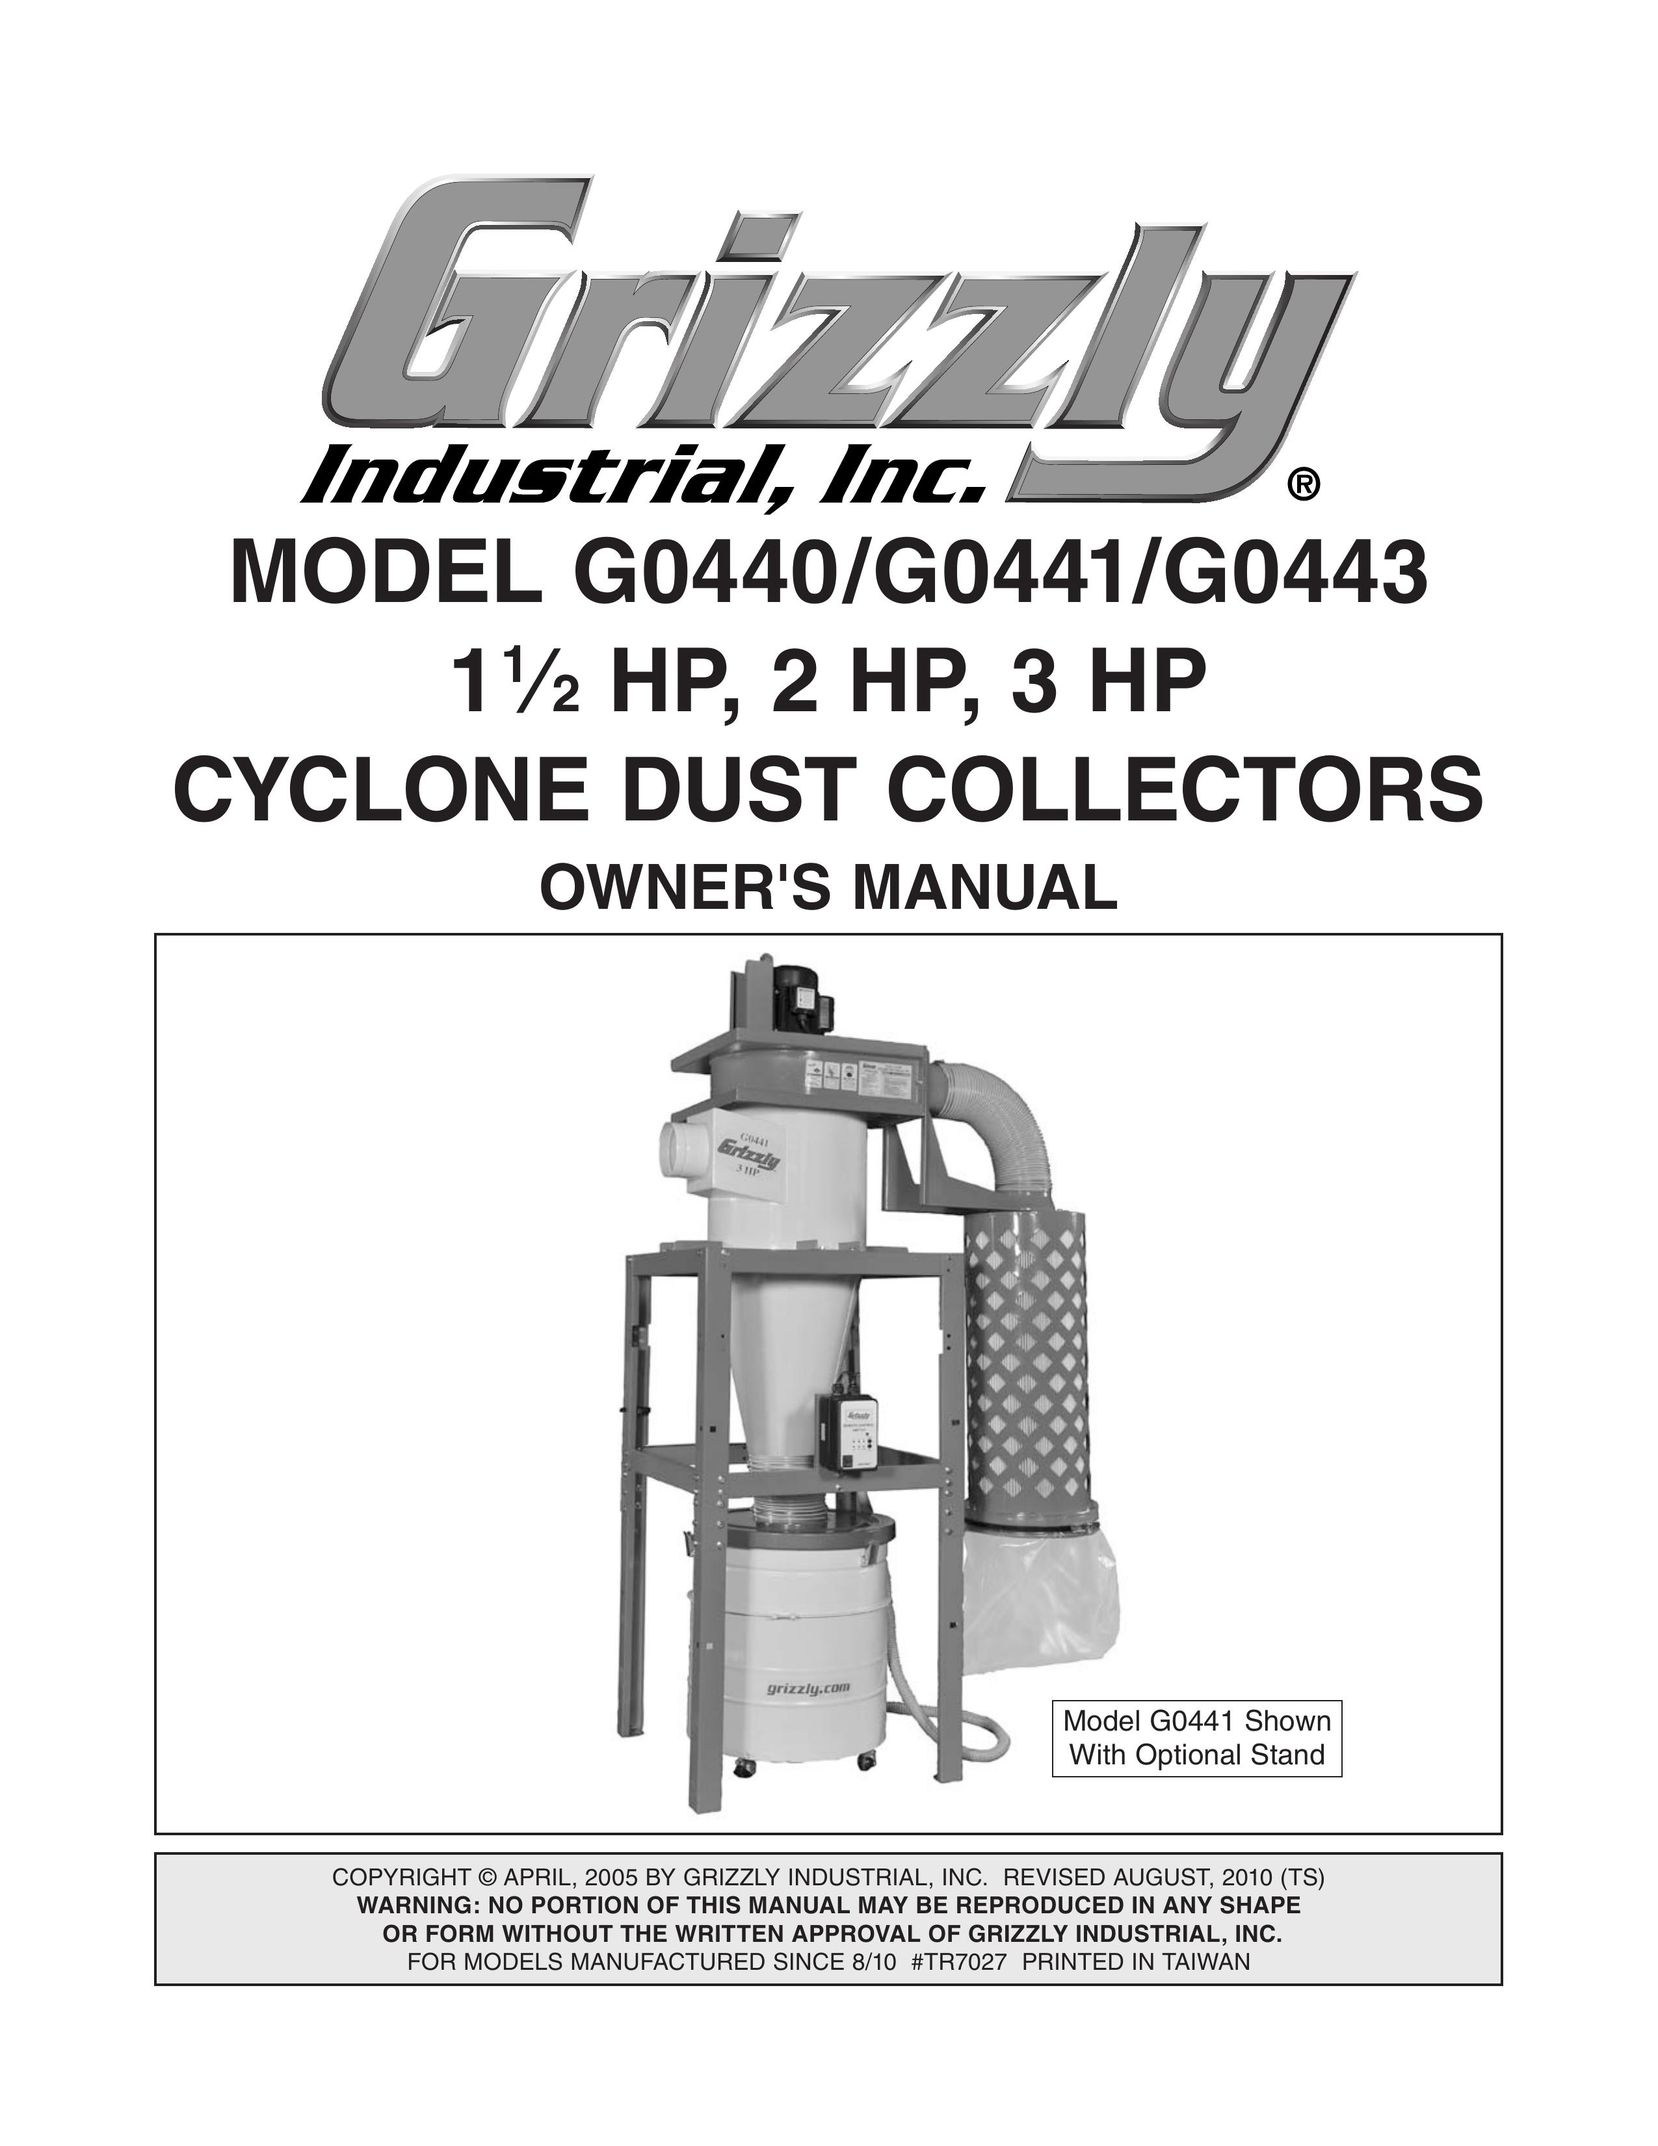 Grizzly G0441 Dust Collector User Manual